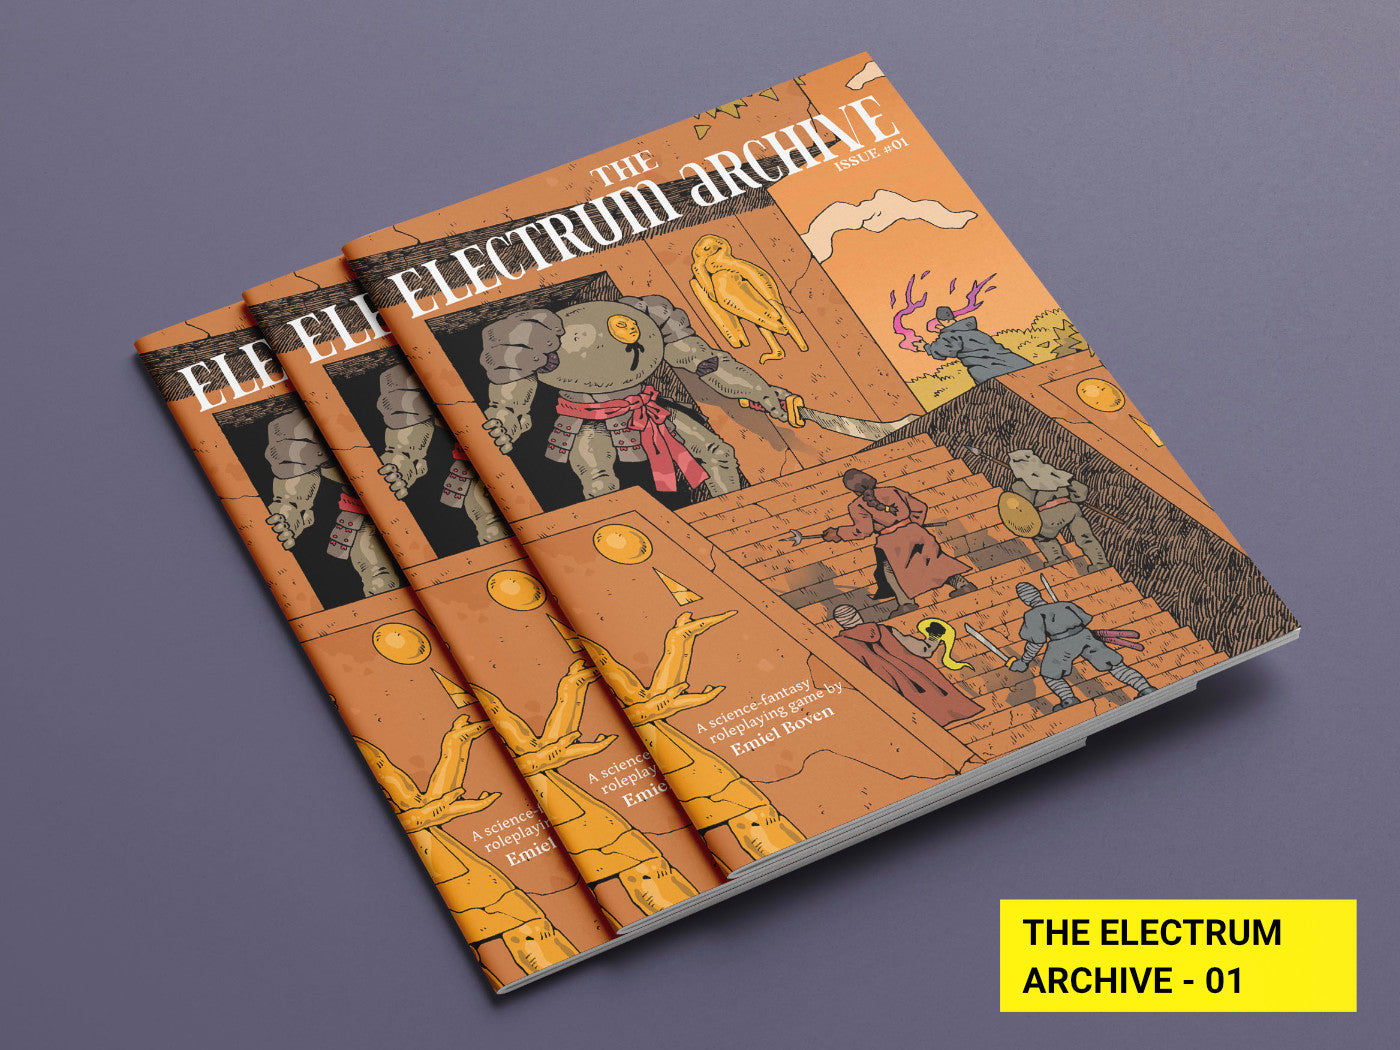 The Electrum Archive Issue 01 by Emiel Boven